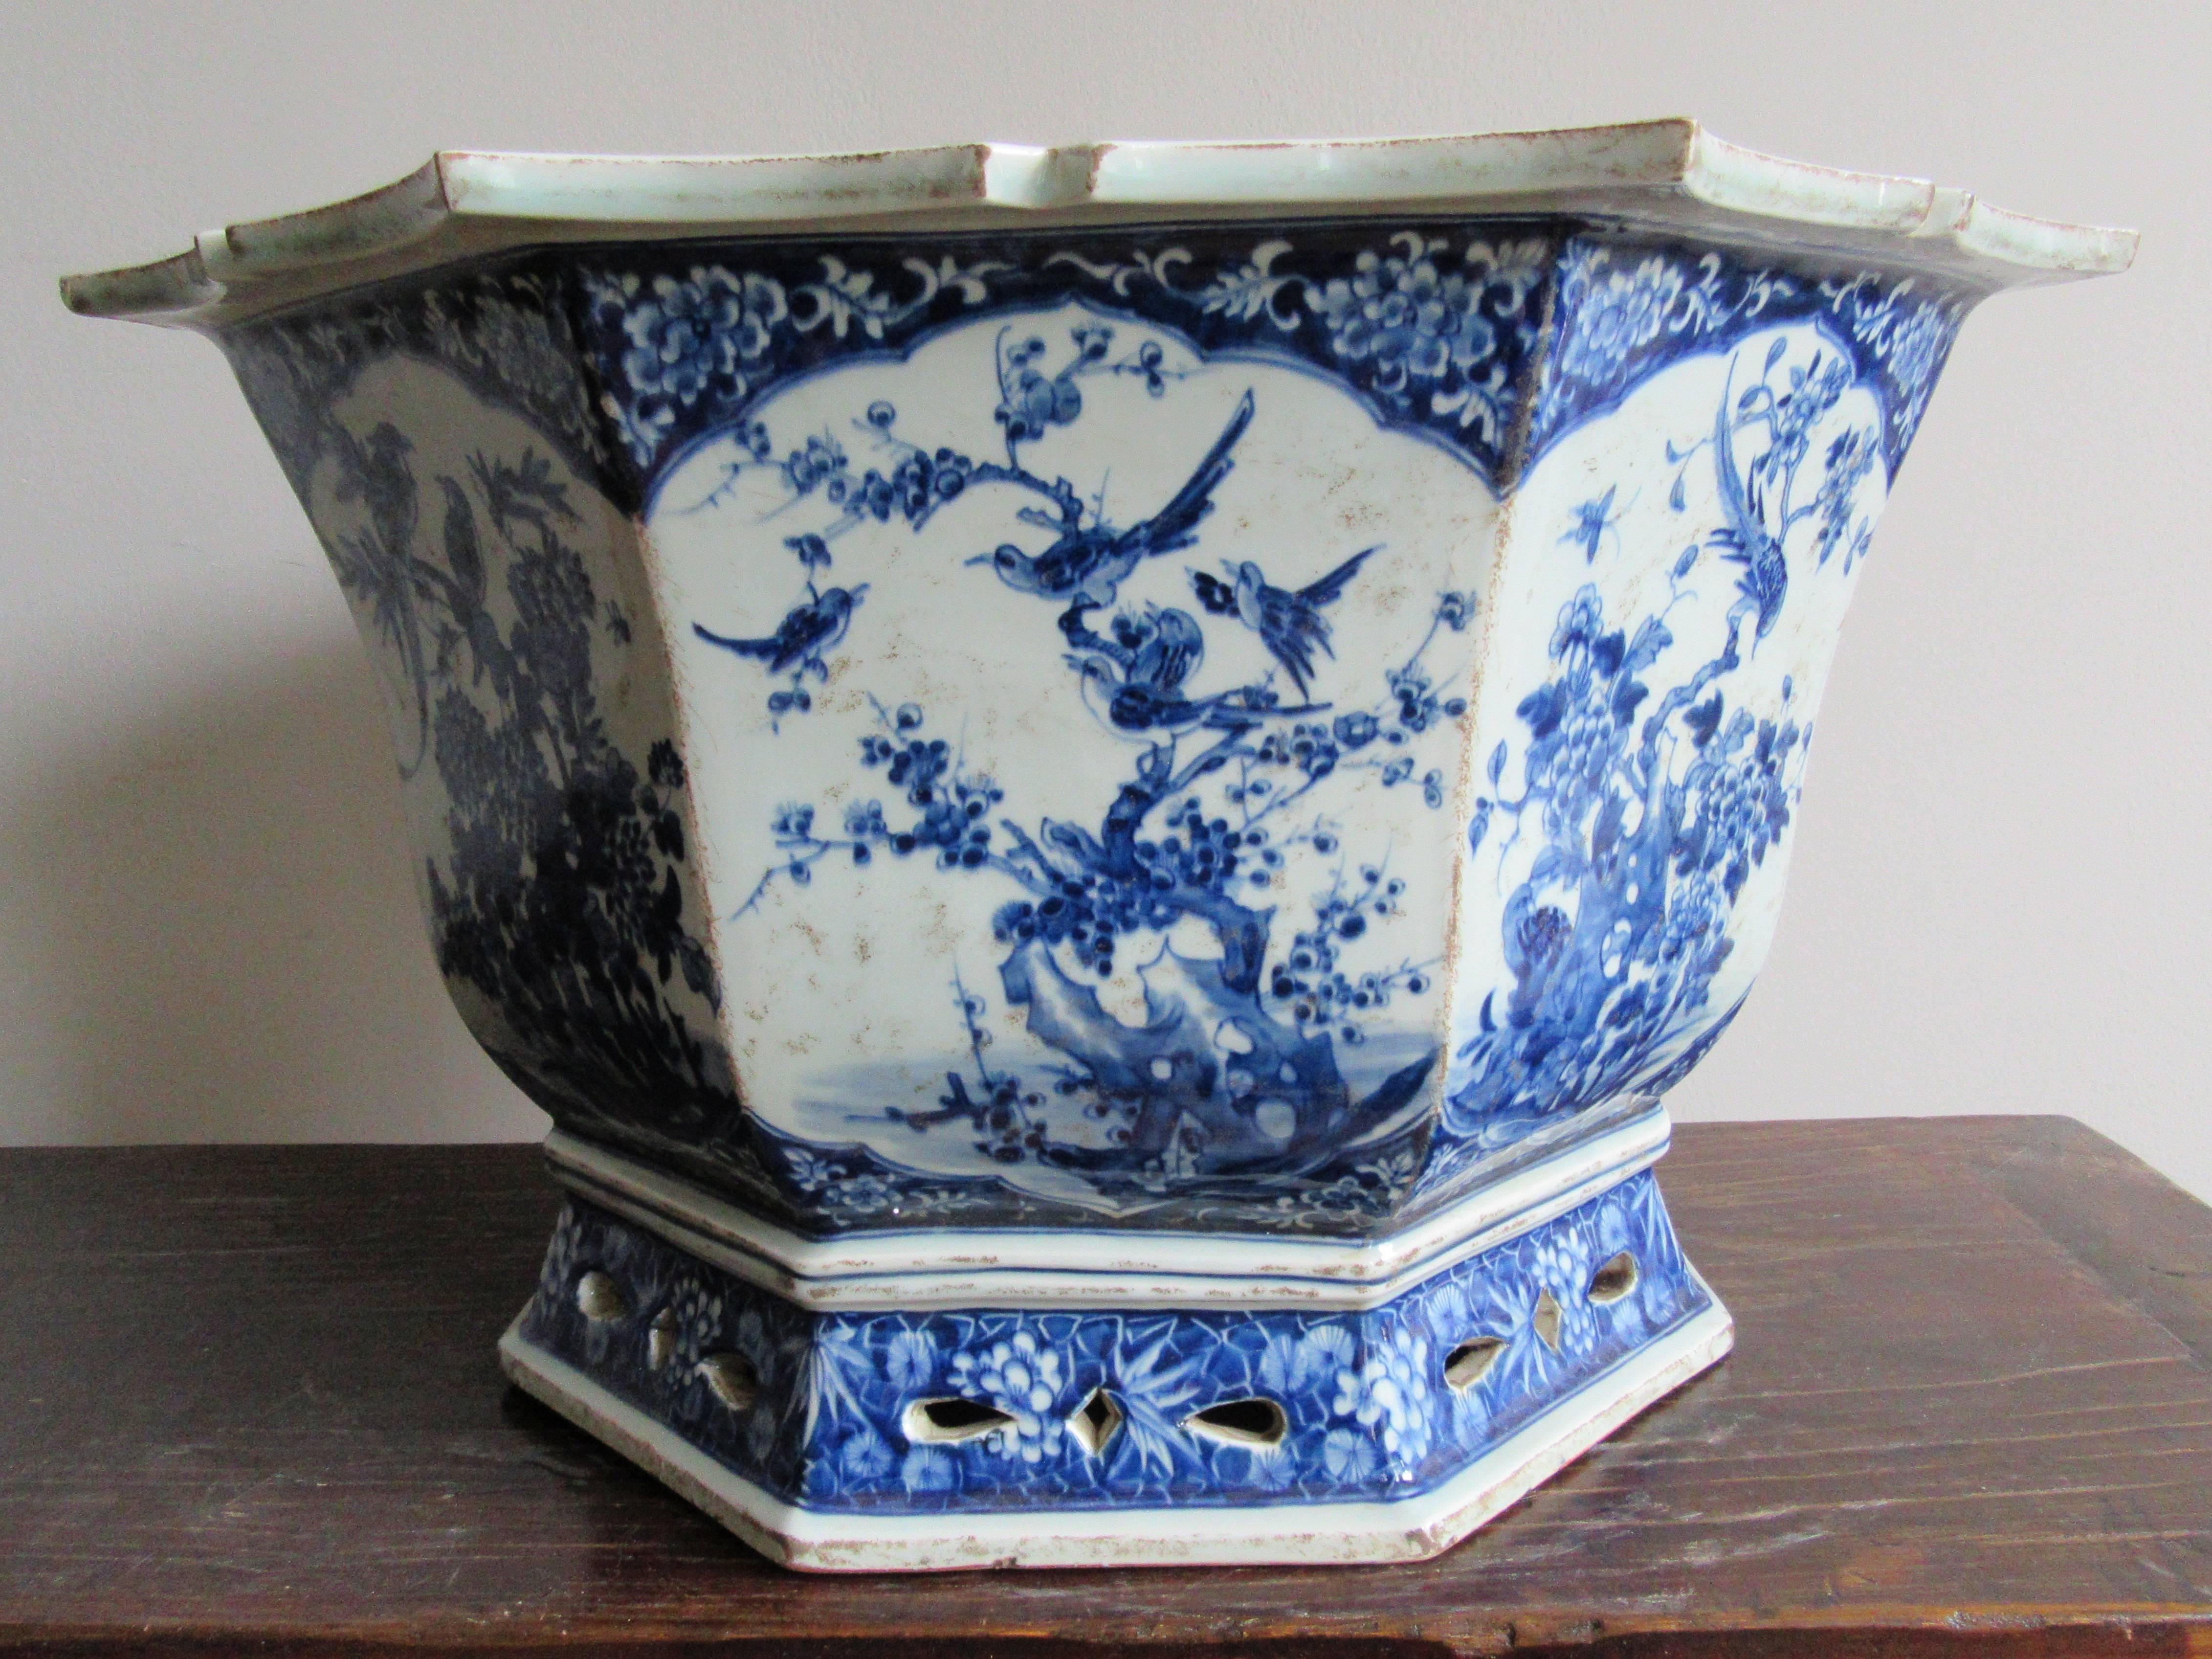 Imposing Chinese blue and white porcelain jardinière/planter. Octagonal in shape each panel is expertly hand painted with a unique floral and aviary motif. The floral paintings depict chrysanthemum, plum blossom, and peony and the bottom has a